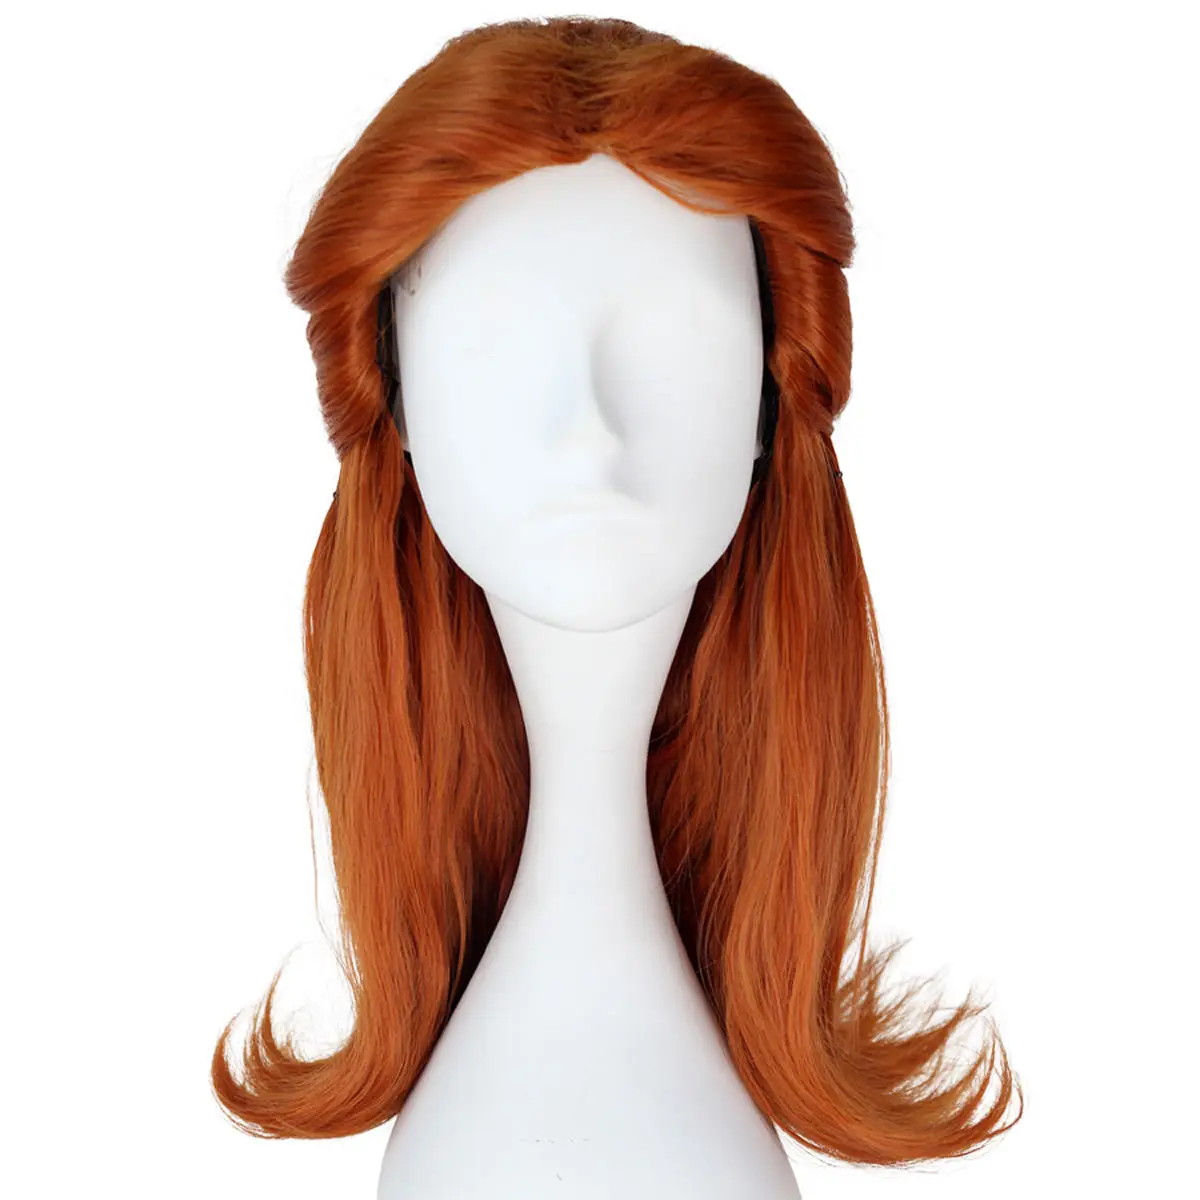 

Movie Tinker Bell And The Pirate Fairy Rosetta Cosplay Wig Women Long Orange Wavy Halloween Costume Party Hair